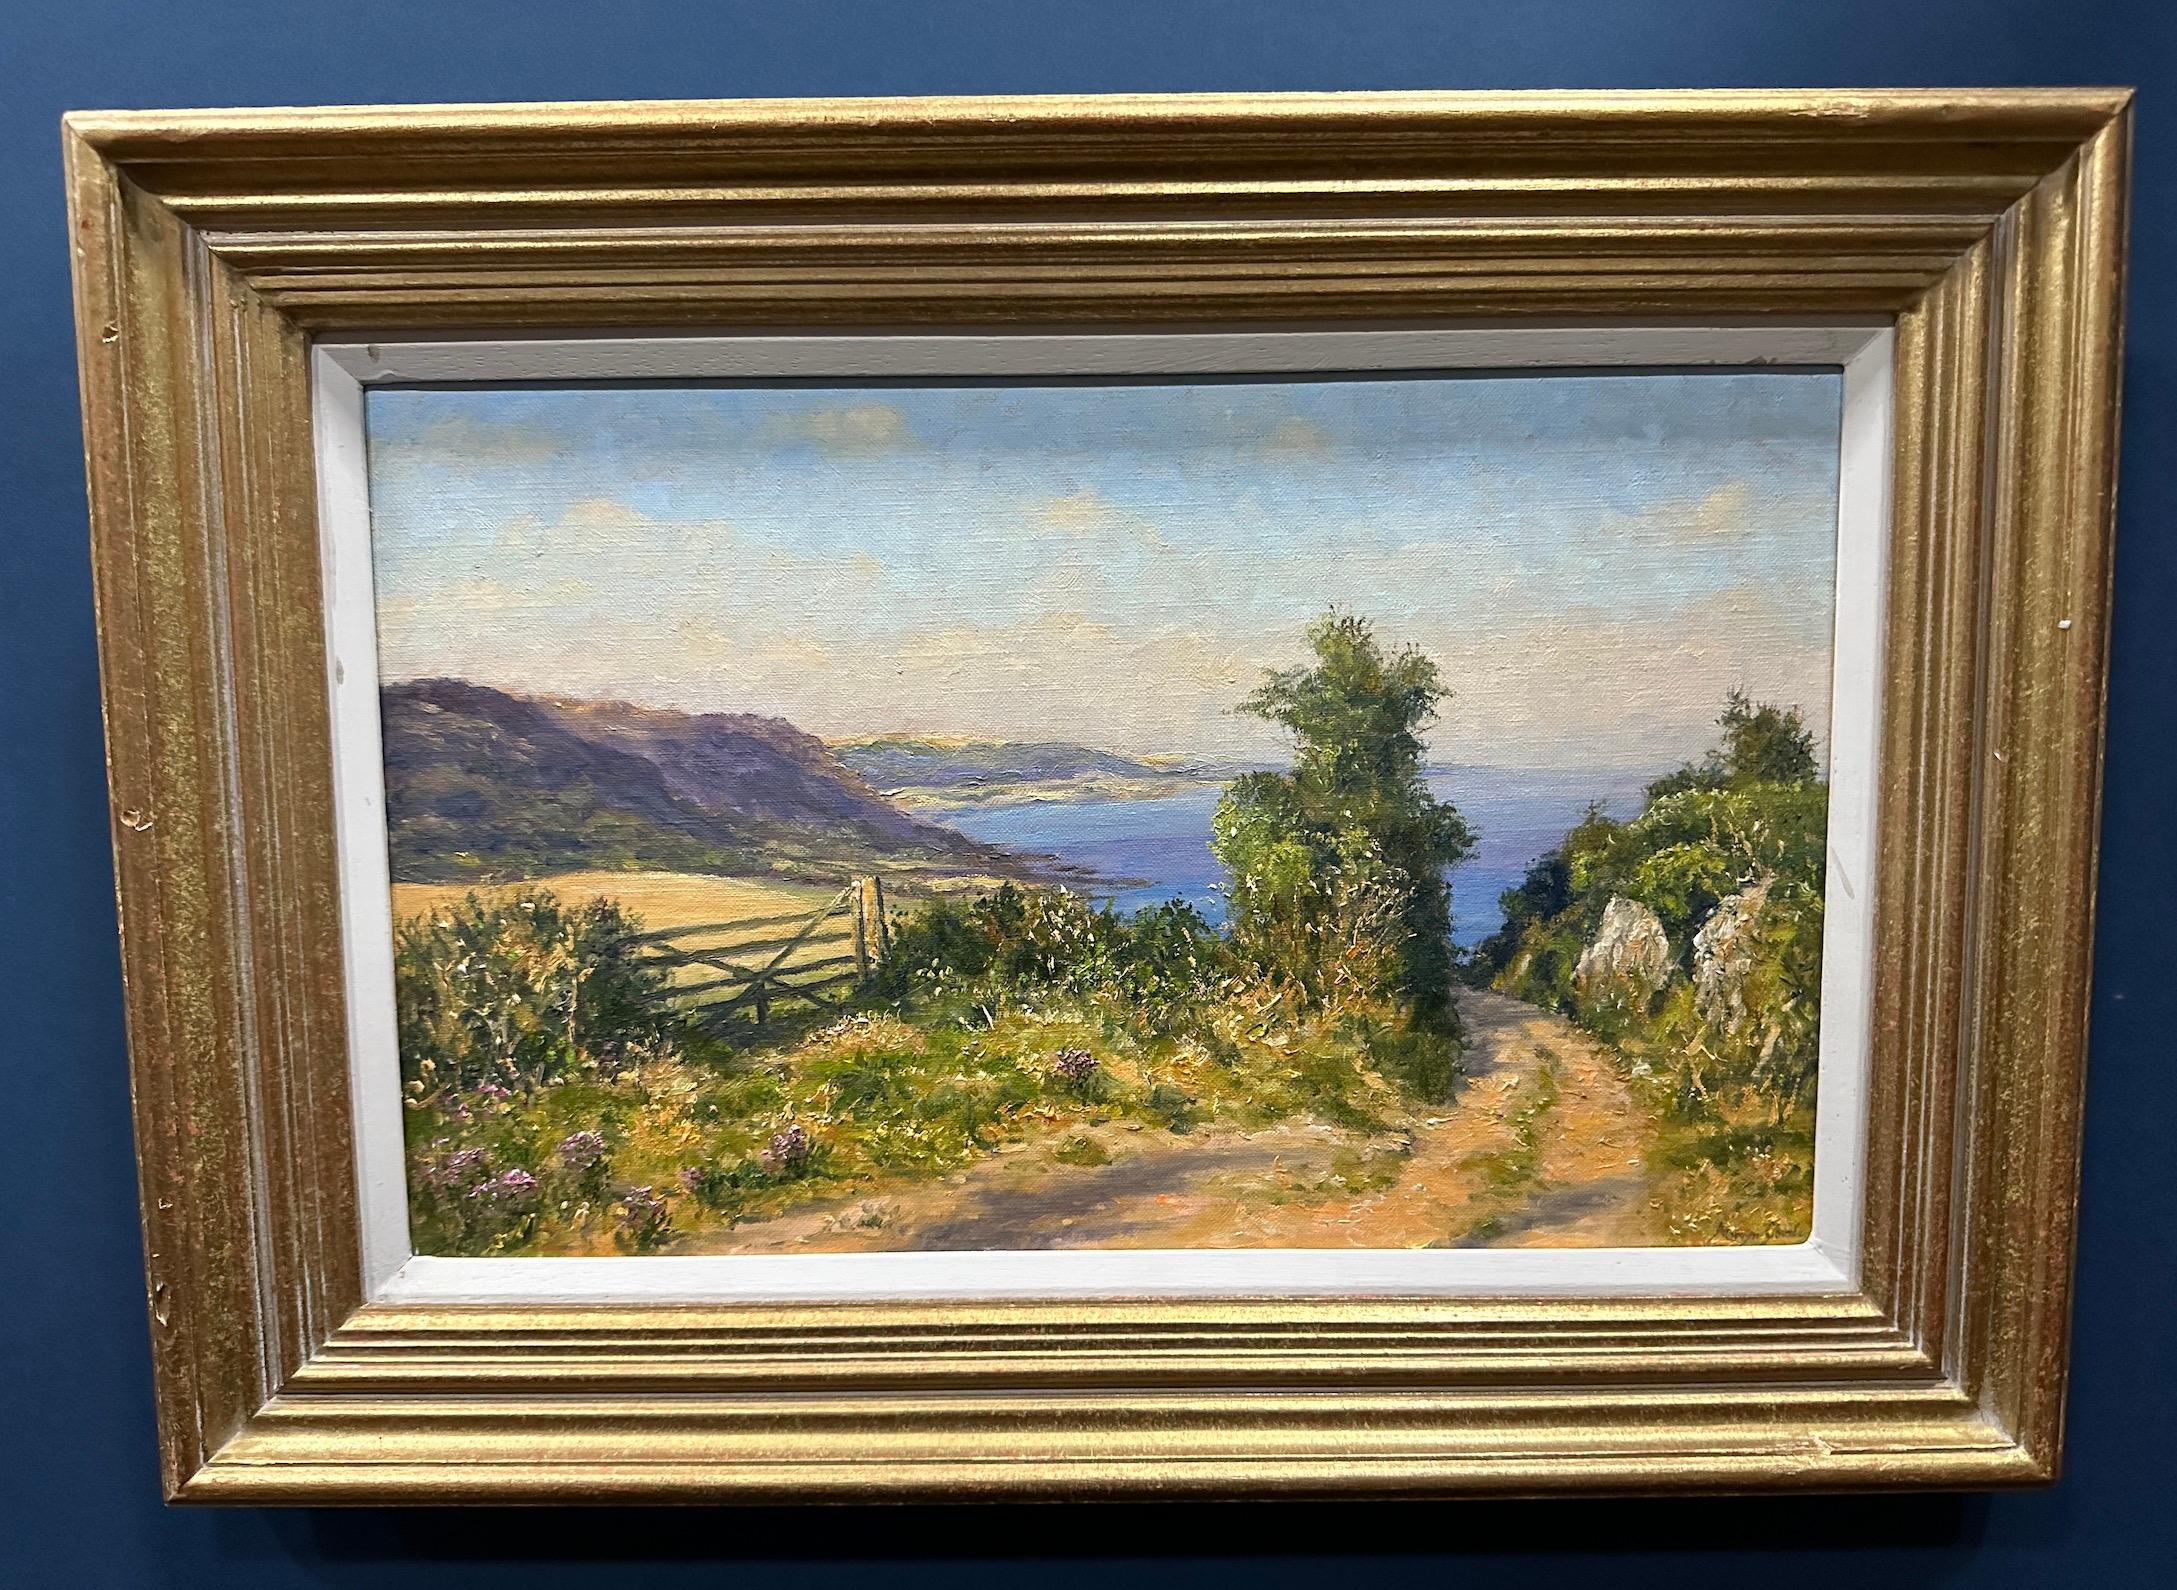 Mervyn Goode Landscape Painting - Impressionist English landscape over looking the Ocean during an English Summer 